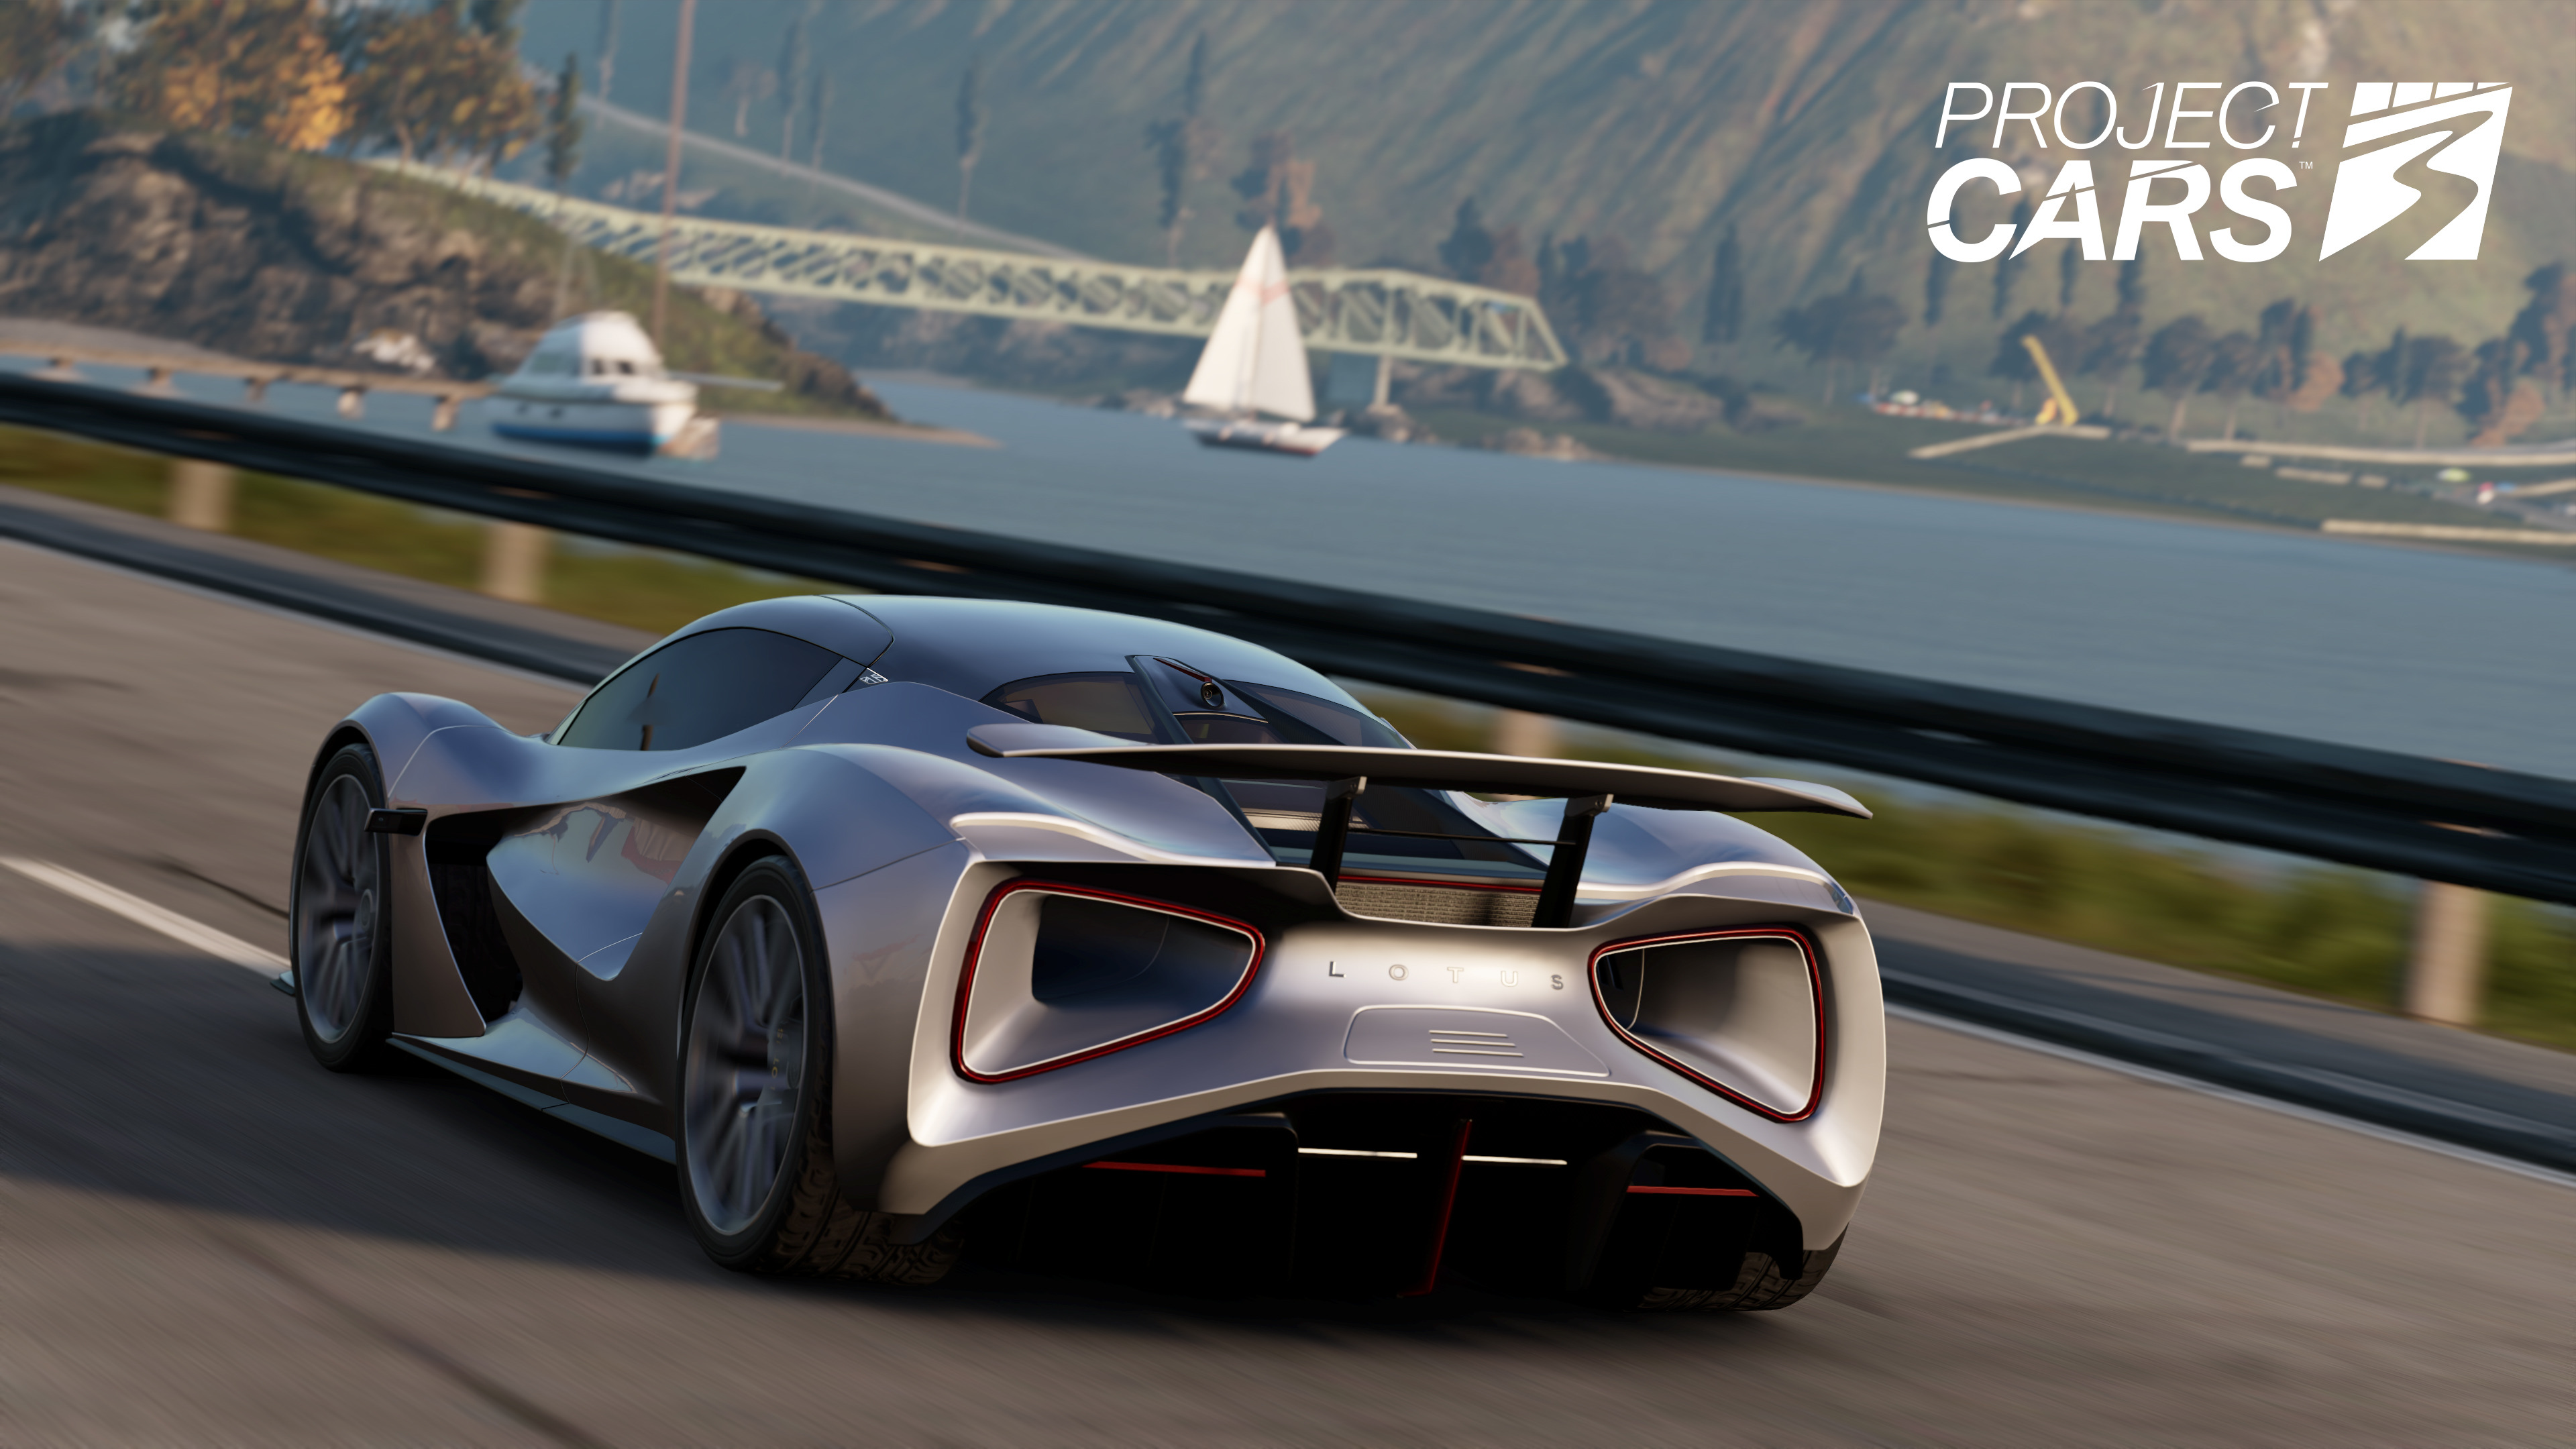 Video Game Project Cars 3 HD Wallpaper | Background Image